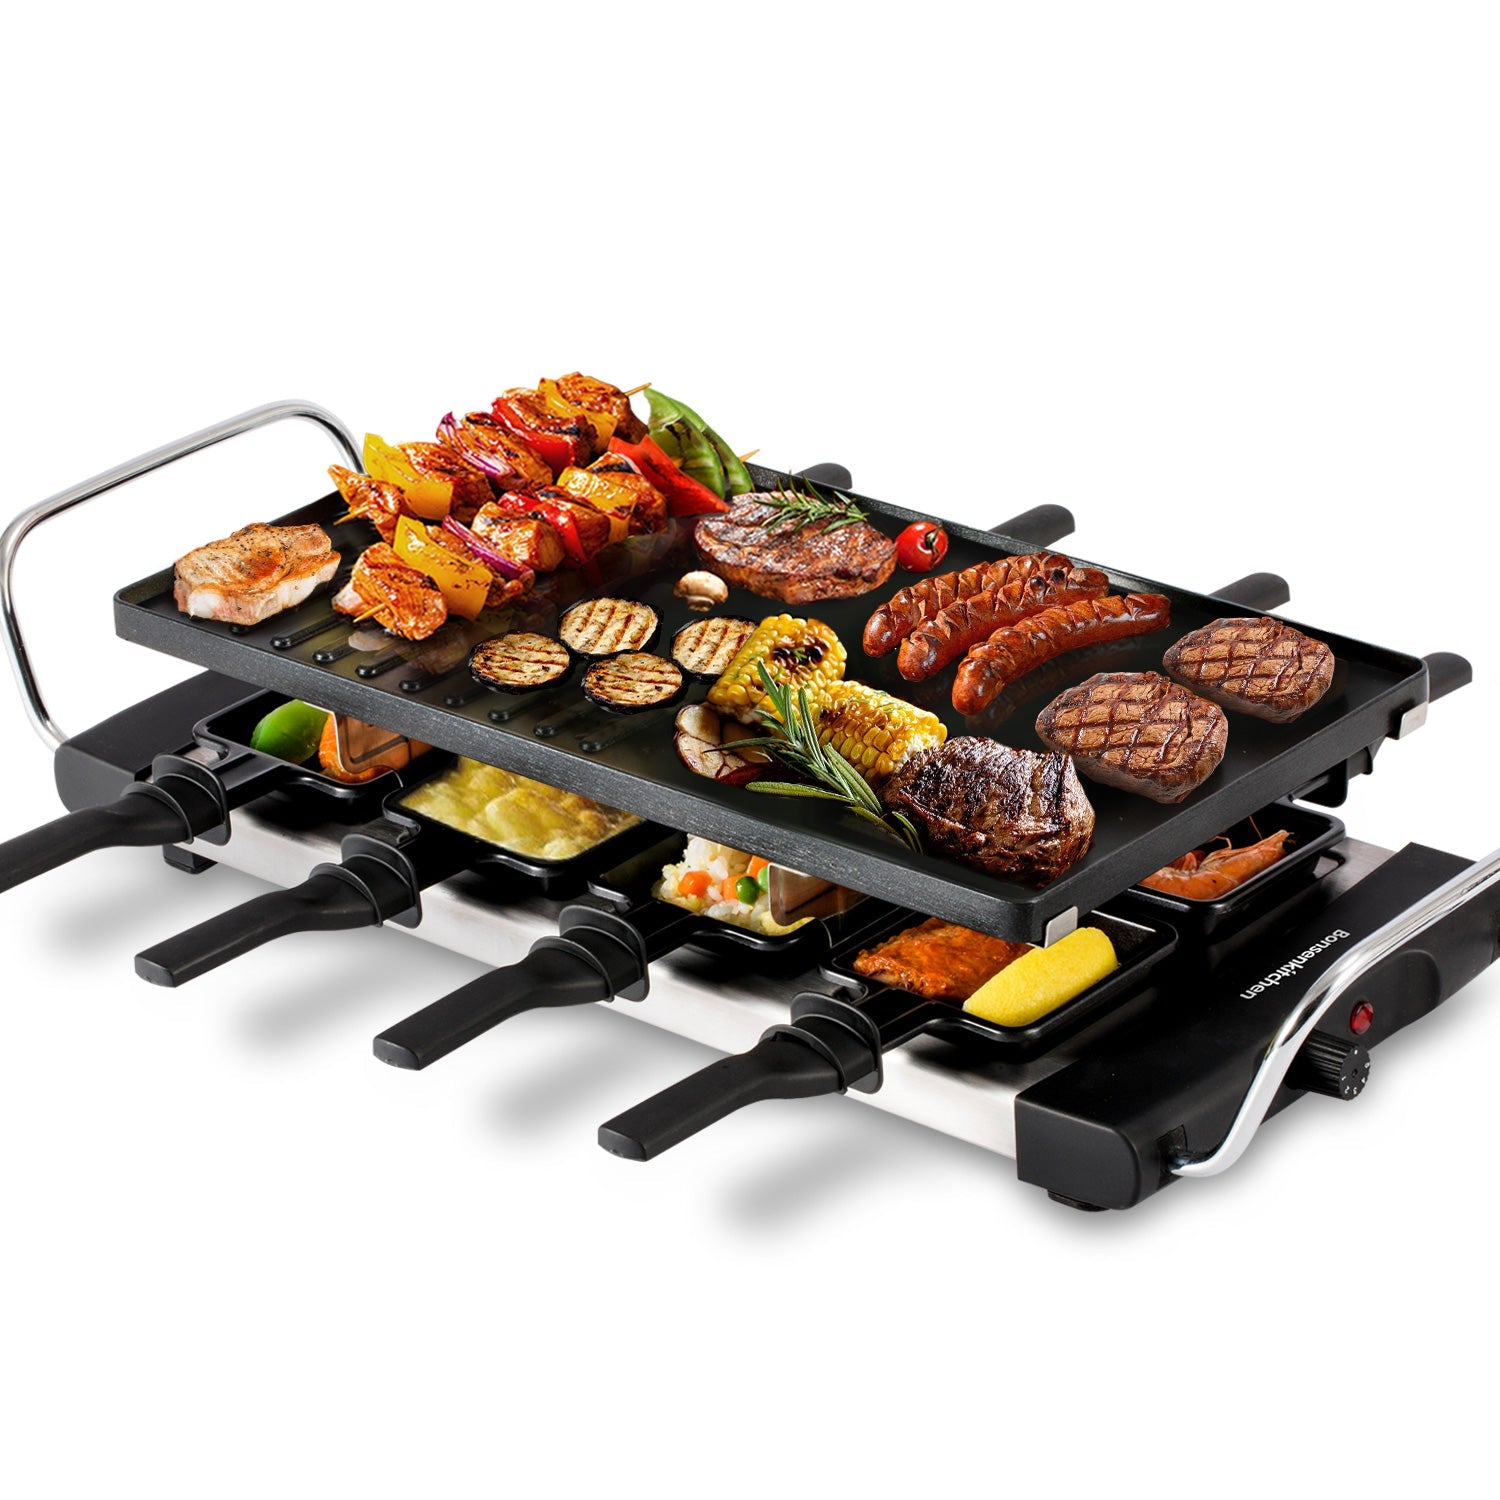 Smokeless Grill Electric Oven - SPKW0148 - IdeaStage Promotional Products